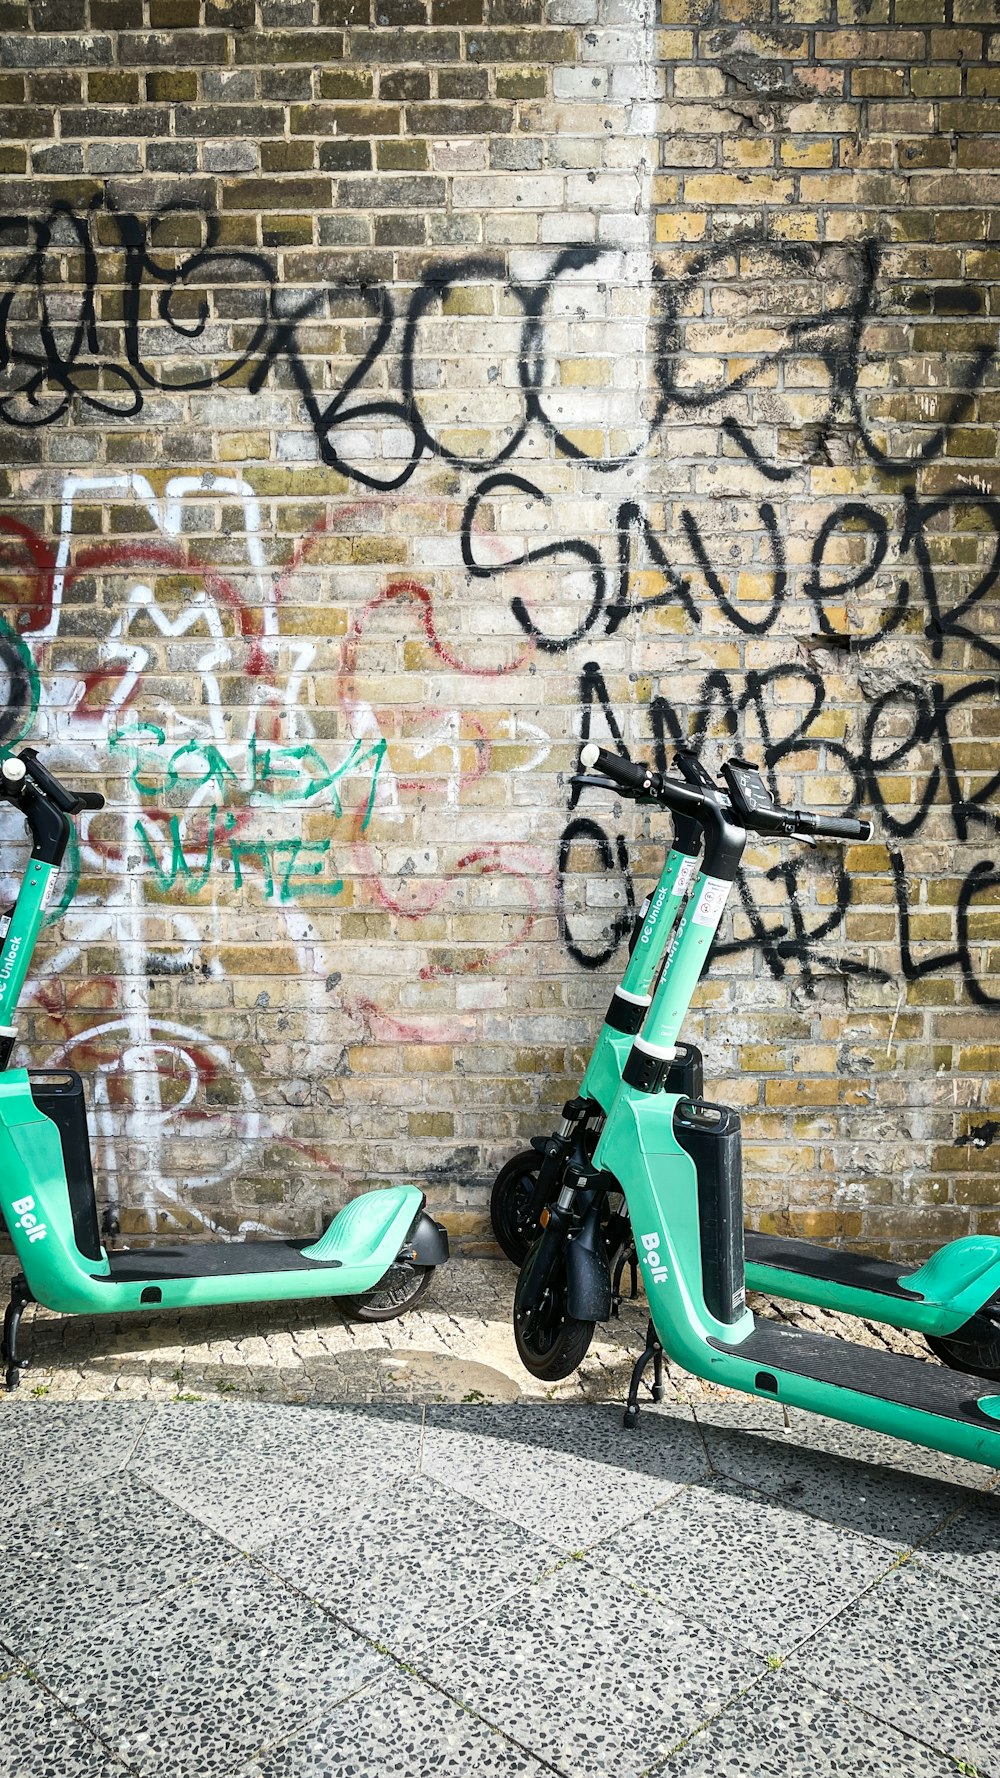 a green scooter parked next to a brick wall with graffiti